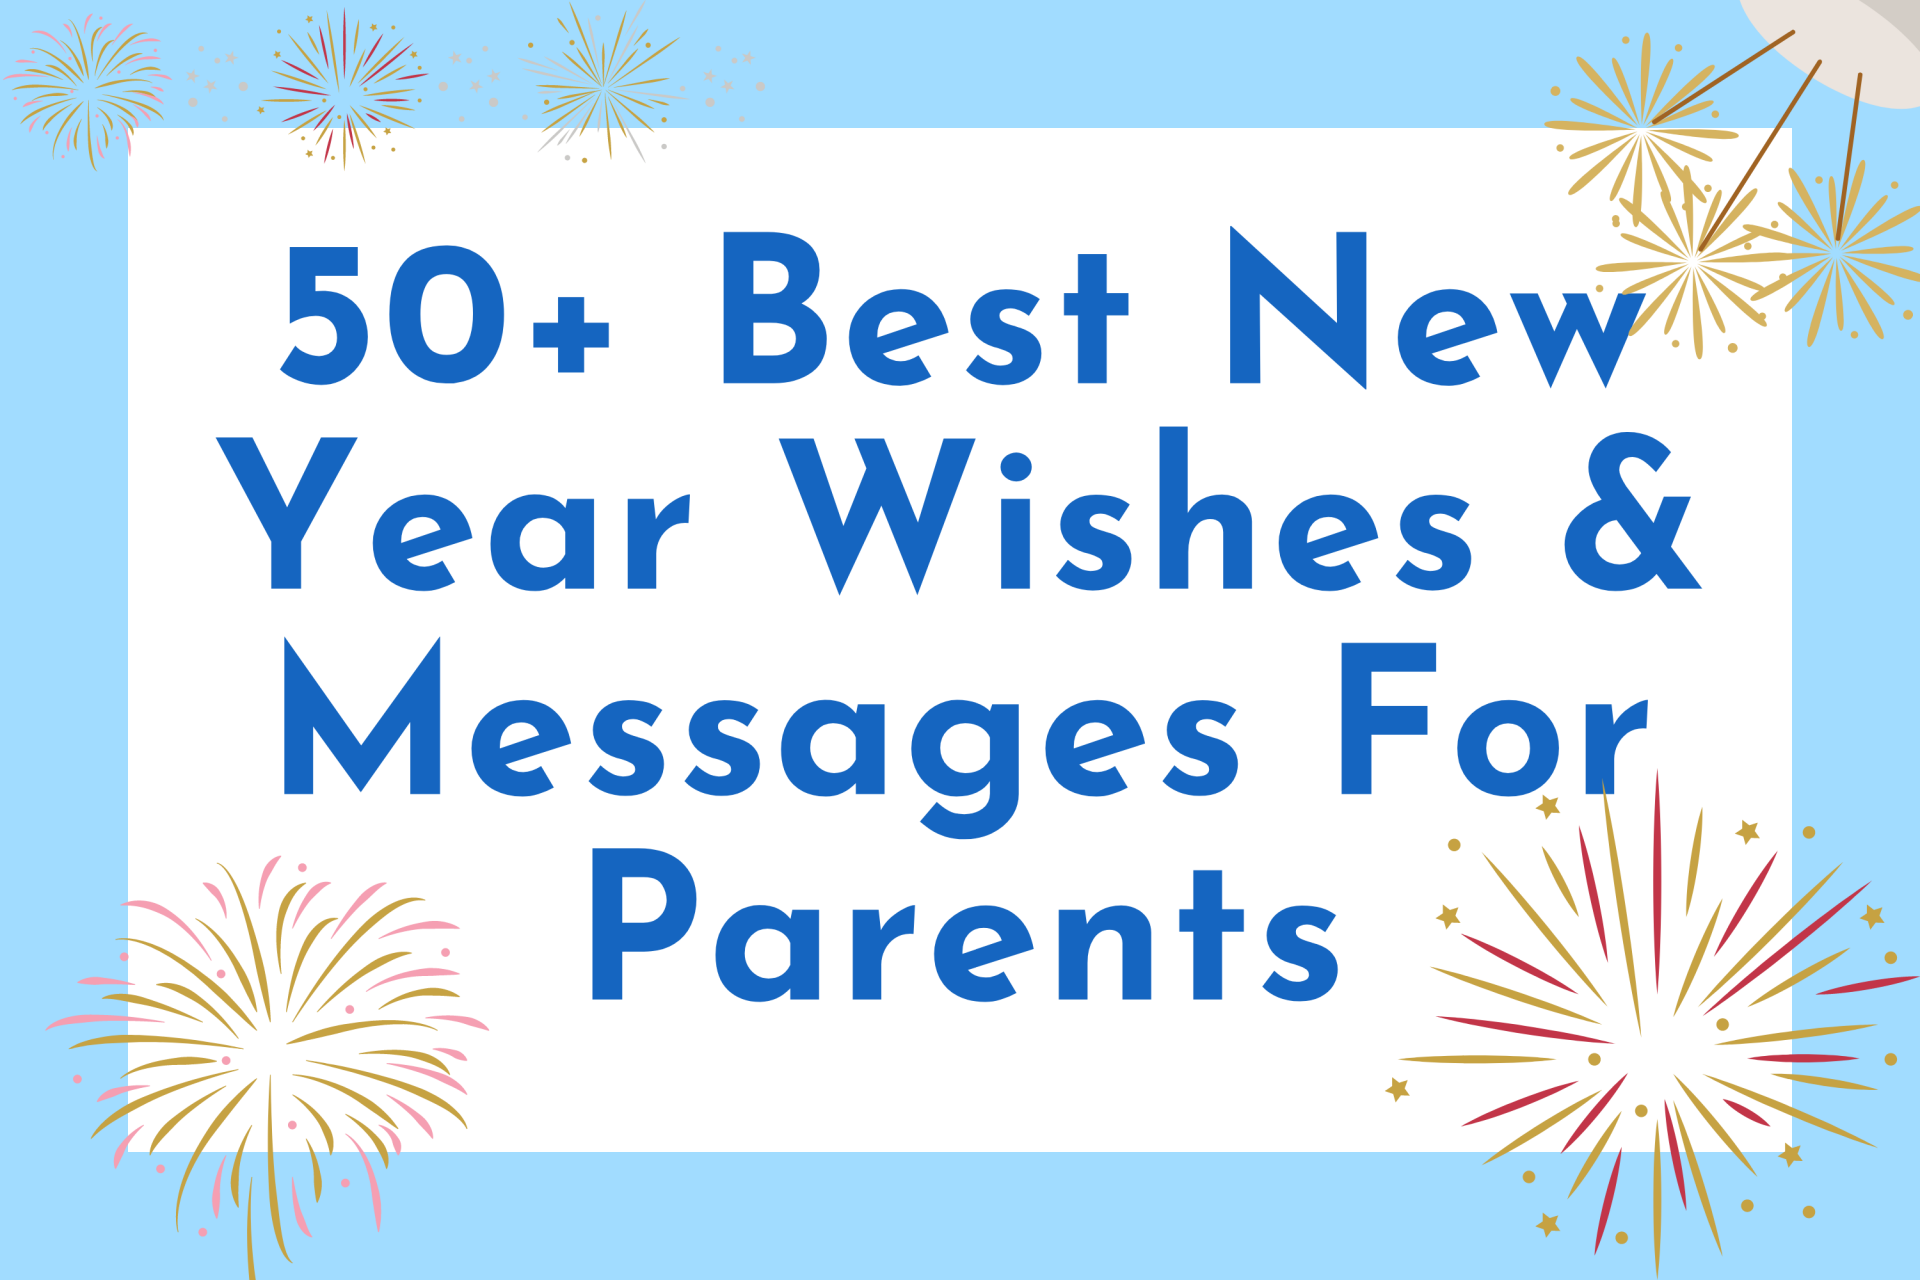 50+ Best New Year Wishes & Messages For Parents